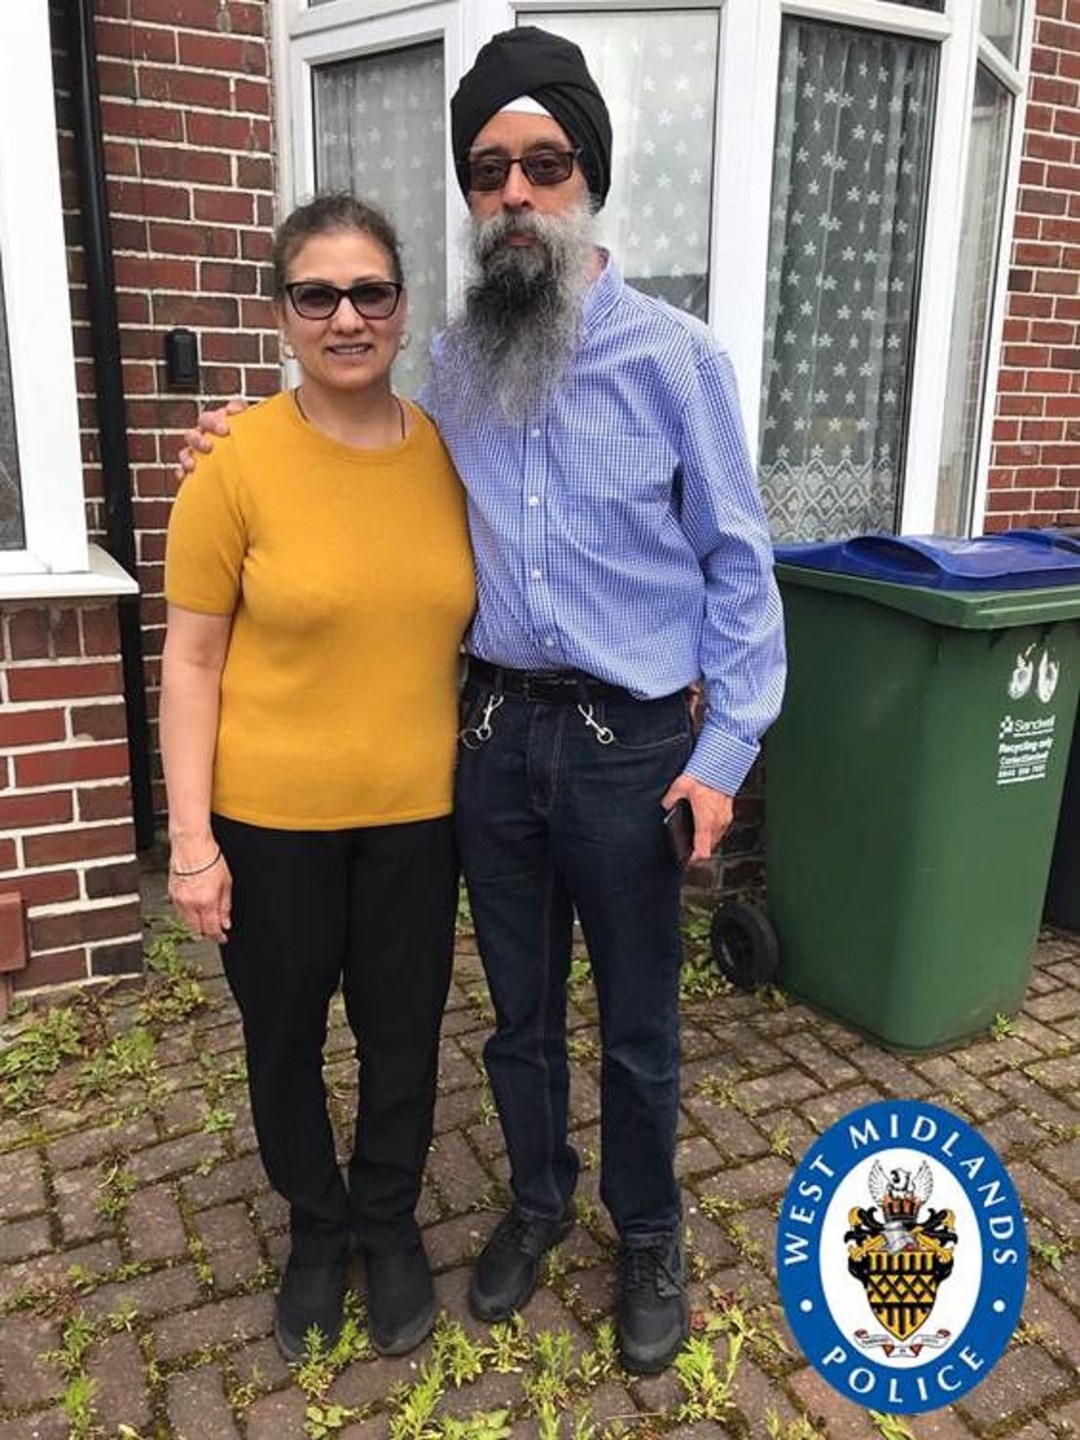 Jasbir Kaur, 52, and her husband Rupinder Singh Bassan, 51, who were found with fatal injuries at their semi-detached house in Moat Road, Oldbury, in the West Midlands (West Midlands Police/PA)